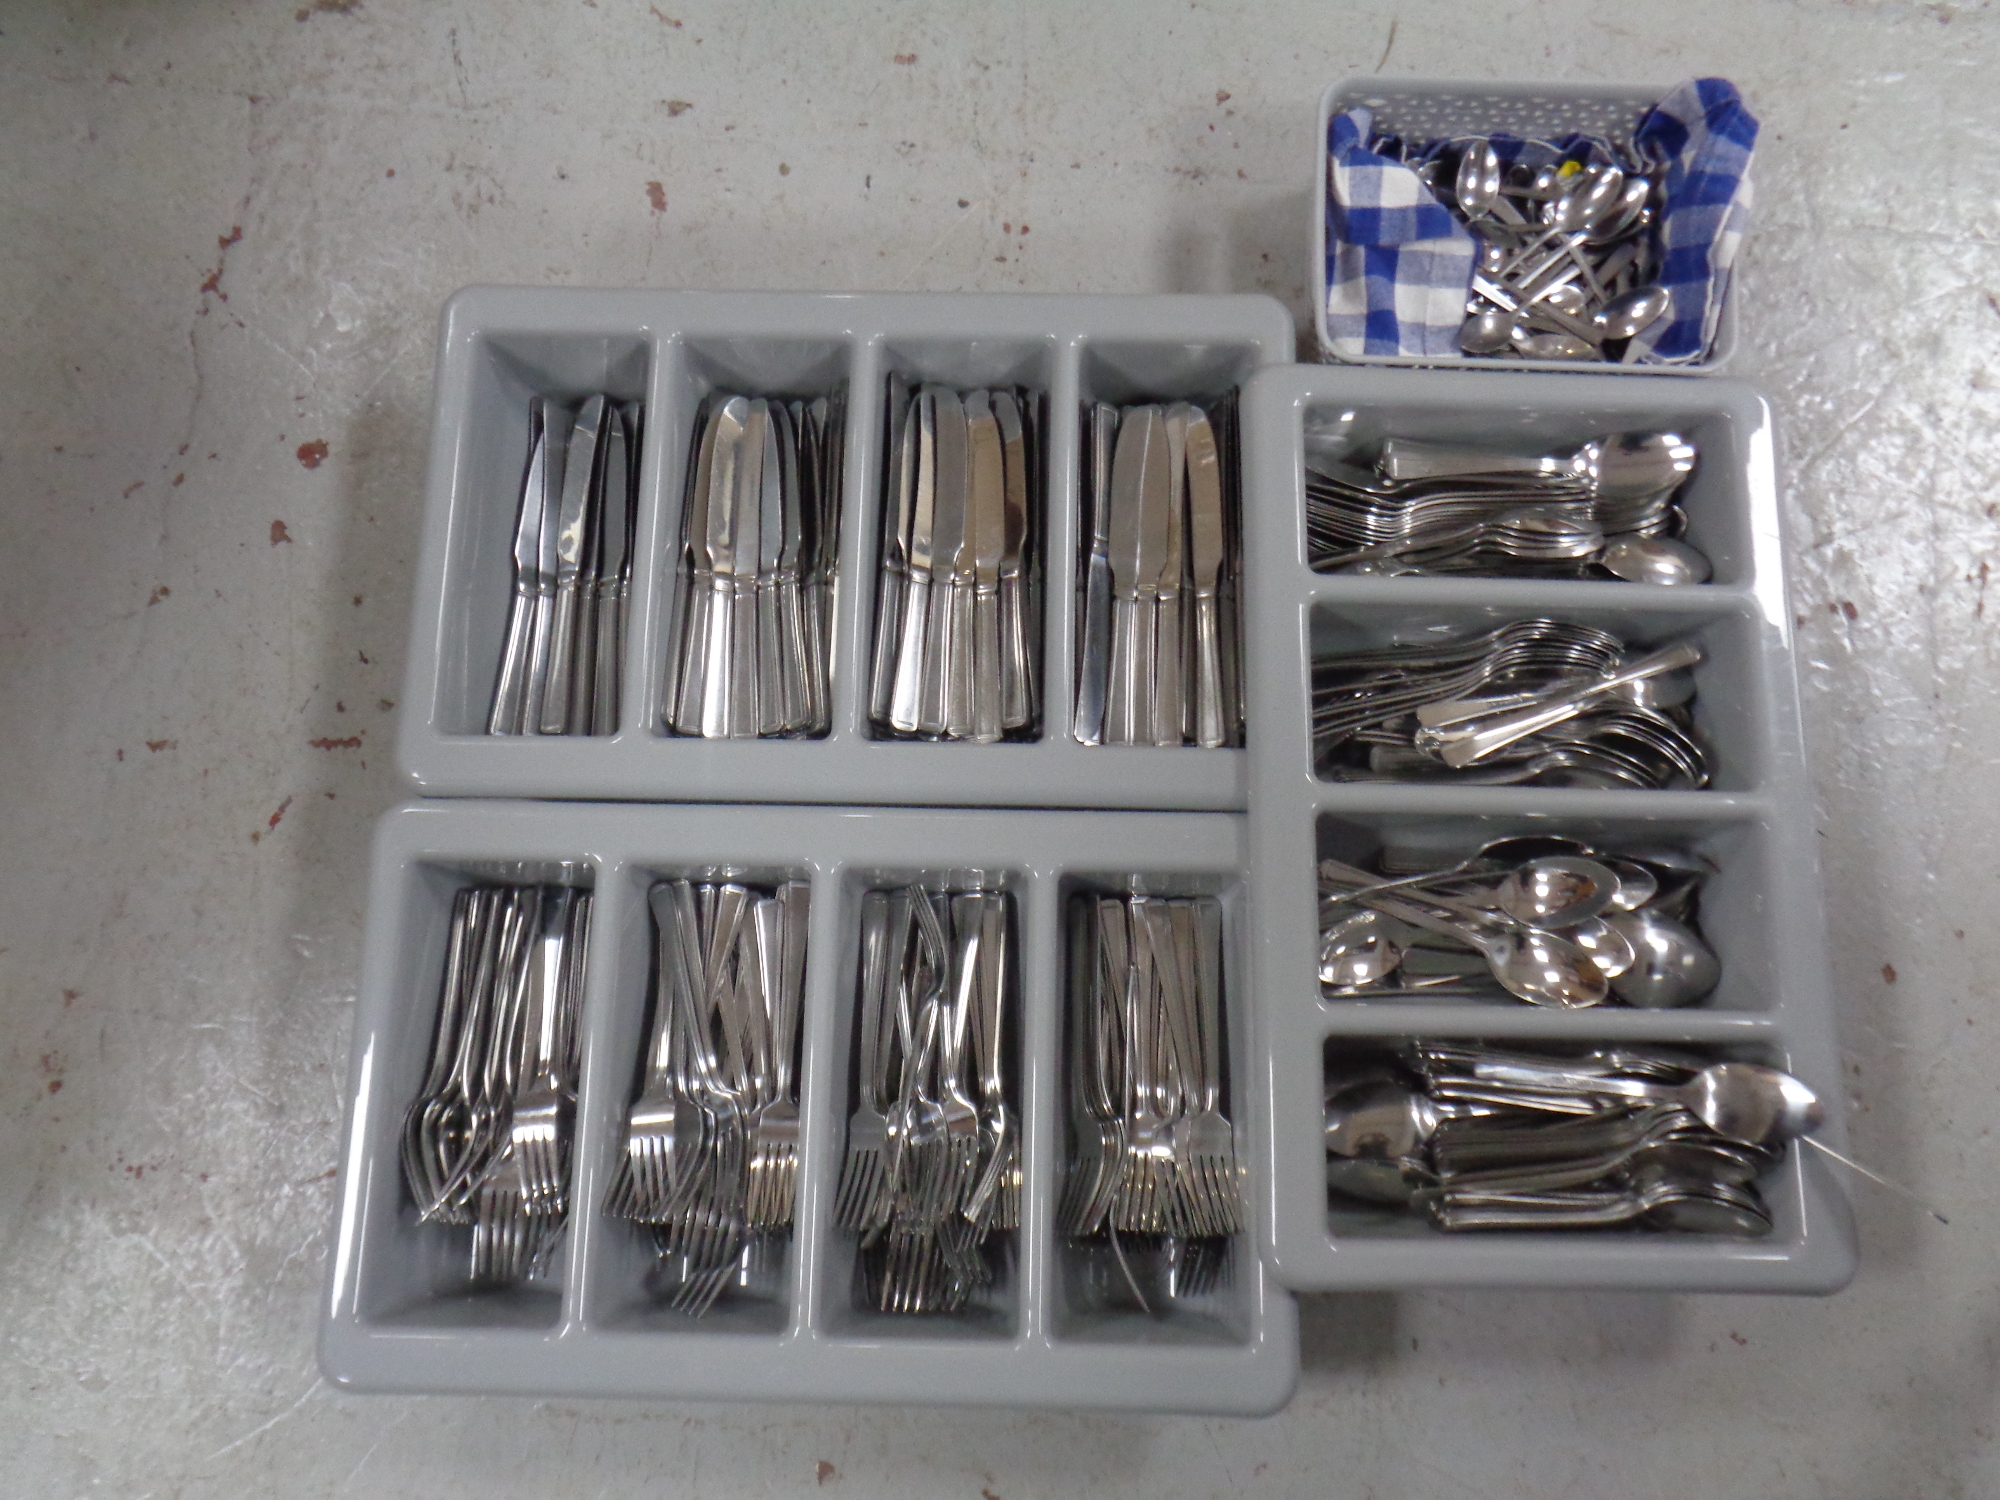 Three cutlery trays and a basket containing a large quantity of stainless steel catering cutlery